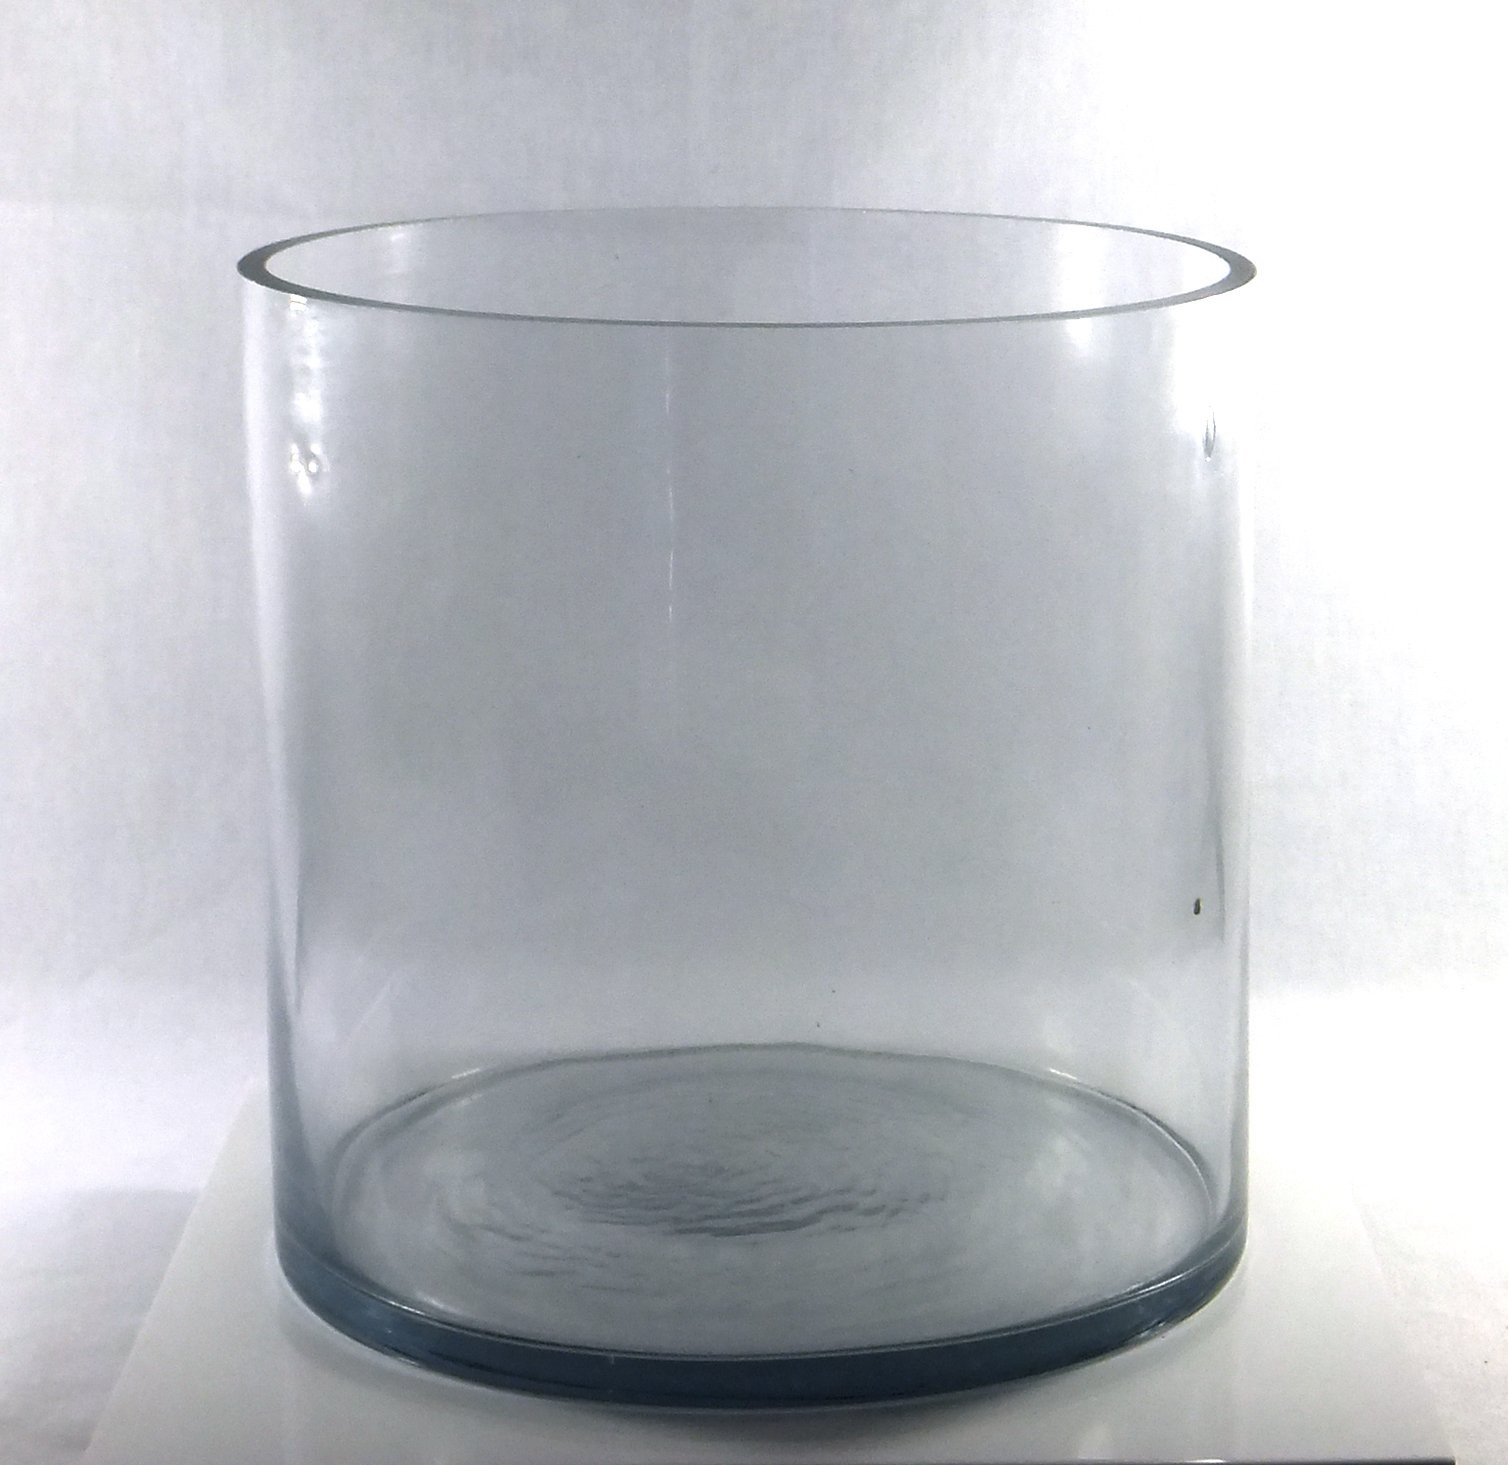 18 Fantastic 12 Inch Glass Vases Cheap 2024 free download 12 inch glass vases cheap of buy 8 inch round large glass vase 8 clear cylinder oversize with regard to 8 inch round large glass vase 8 clear cylinder oversize centerpiece 8x8